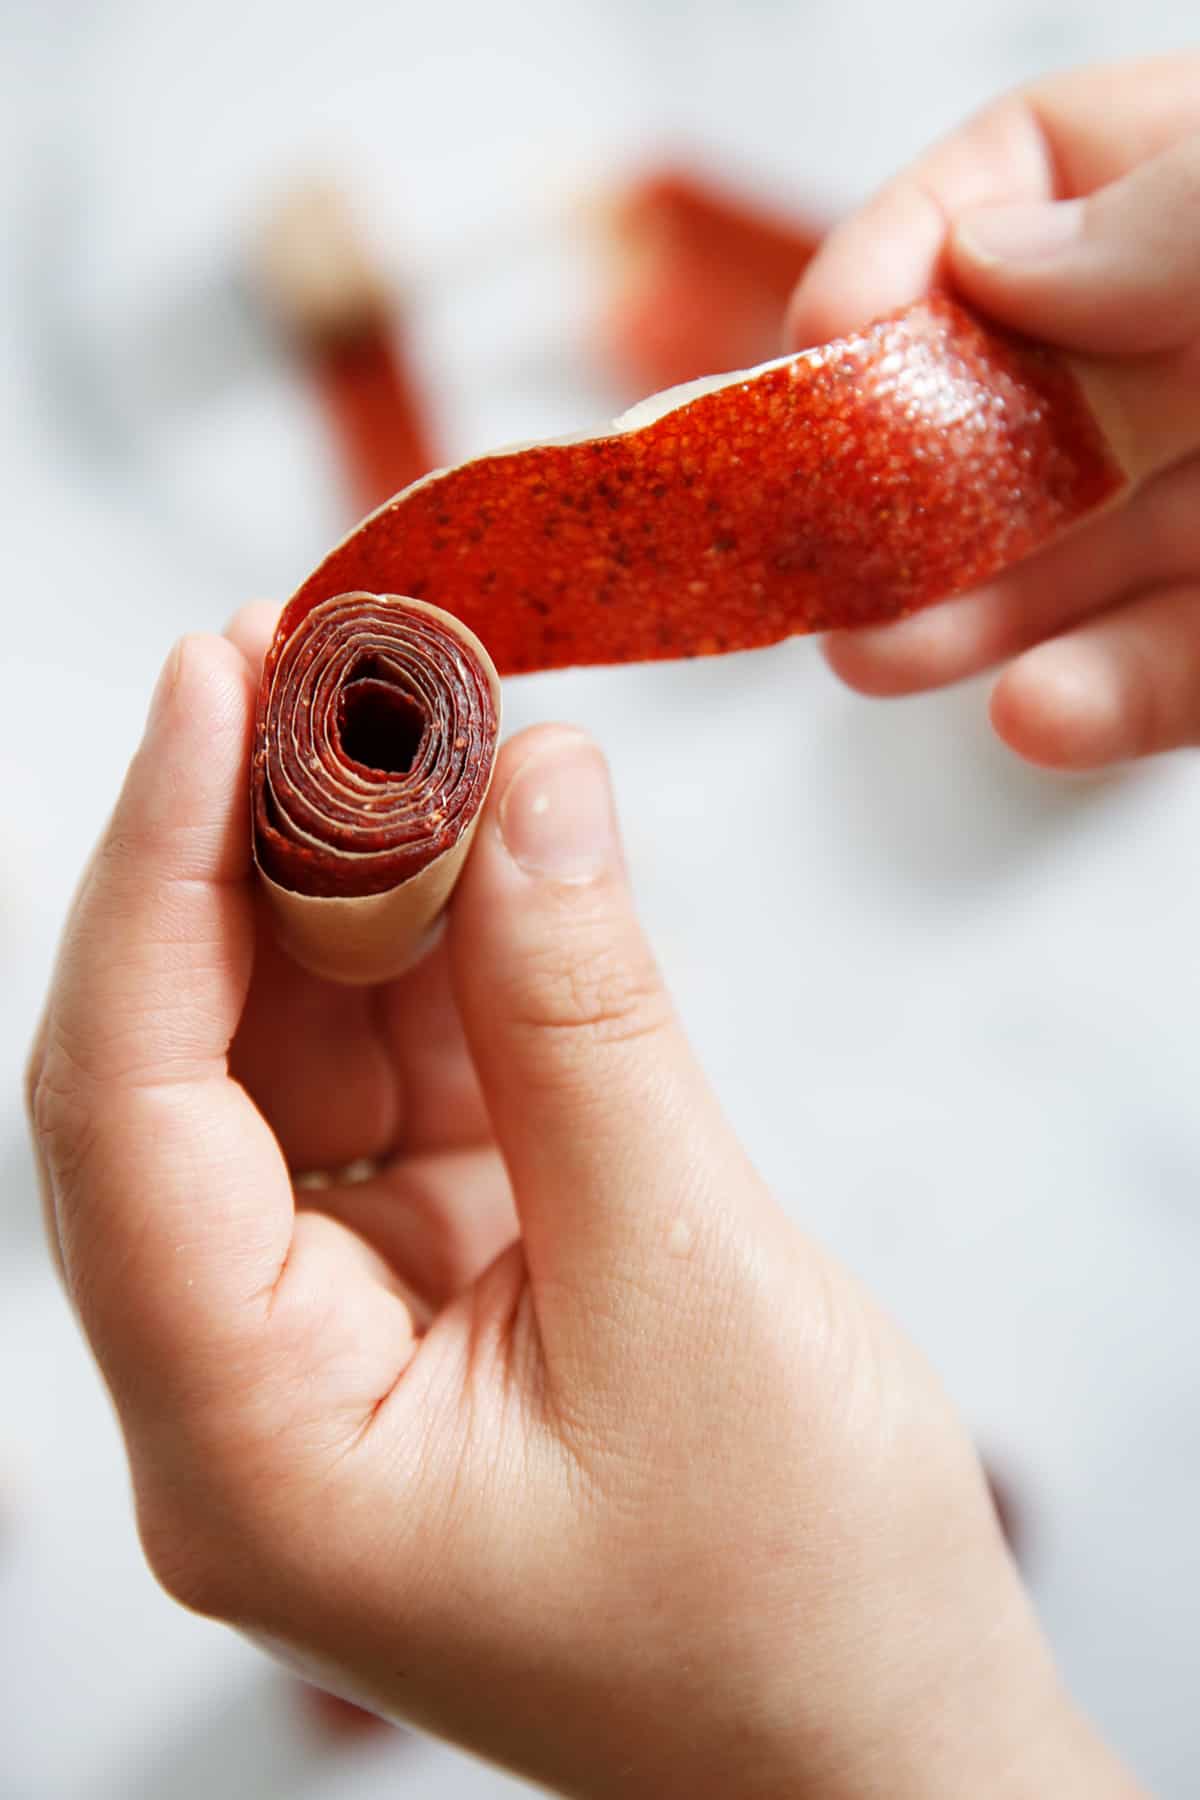 2-Ingredient Strawberry Fruit Leather